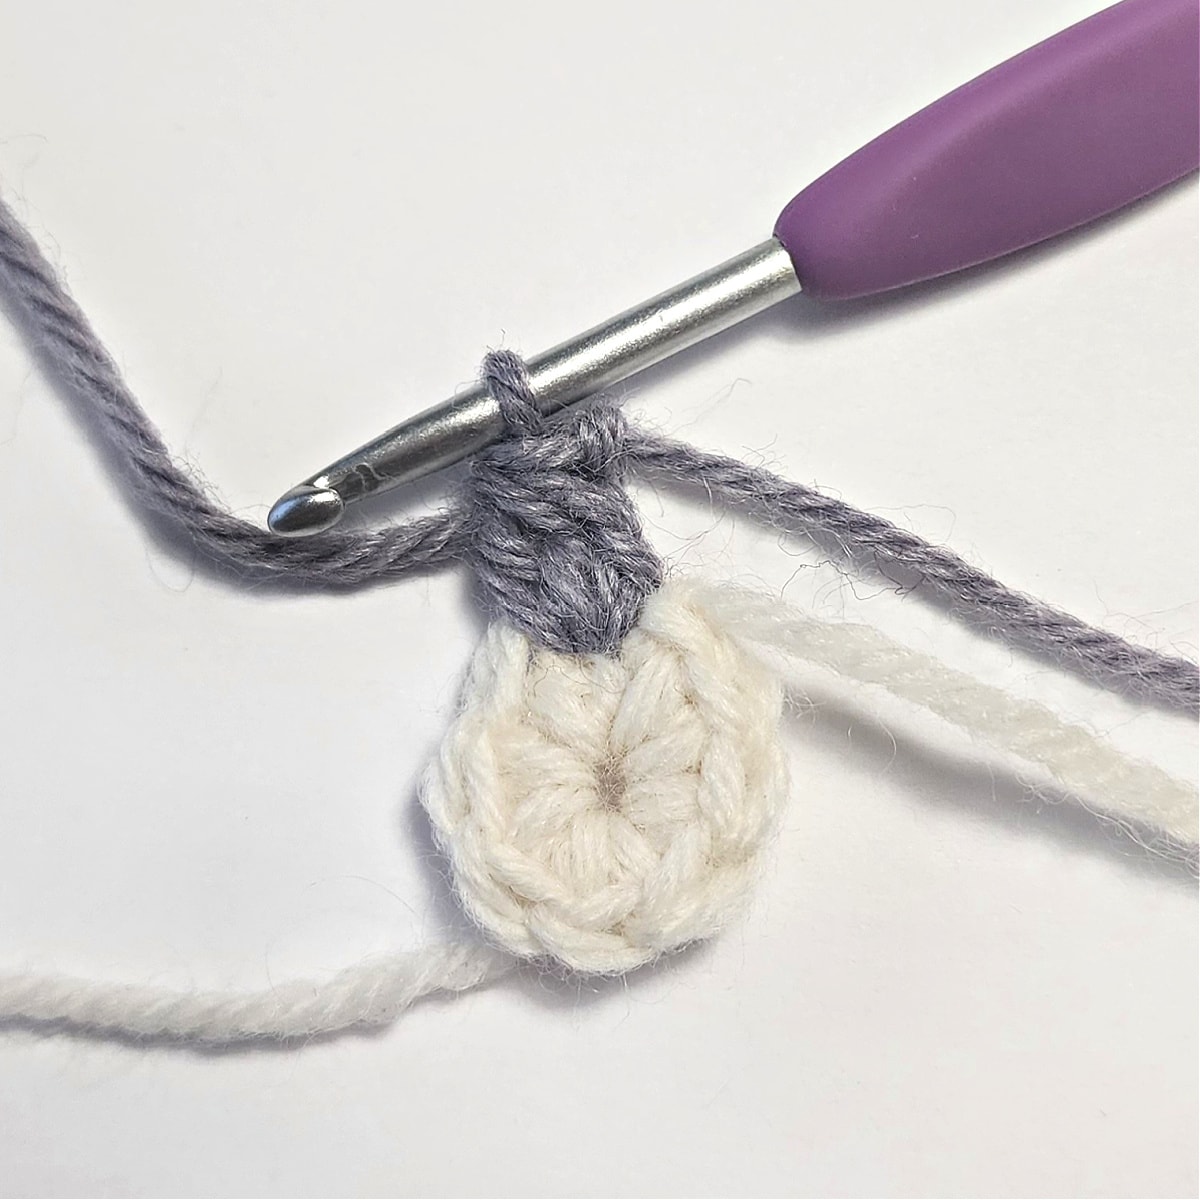 Purple double crochet cluster stitch worked onto a white crochet circle.